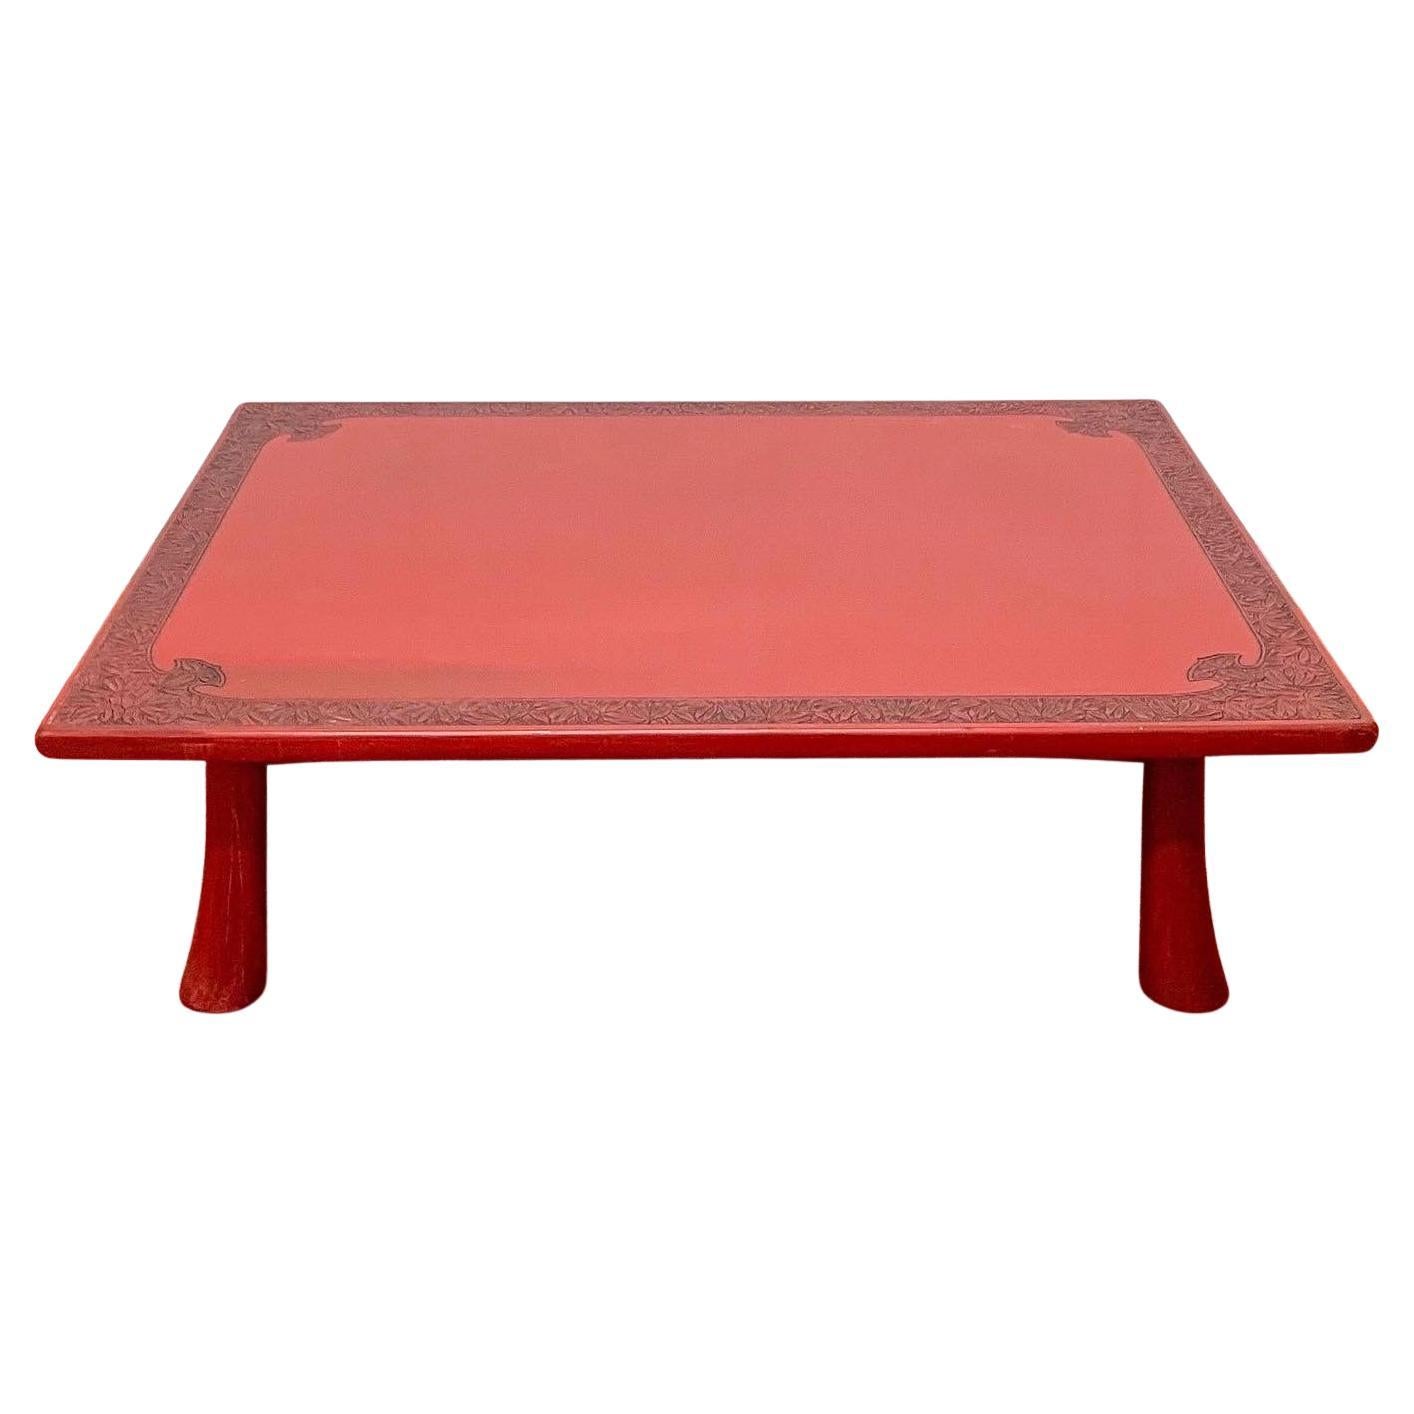 Red Lacquer Fibreglass Coffee Table, Japanese Meiji Style, C1980s For Sale